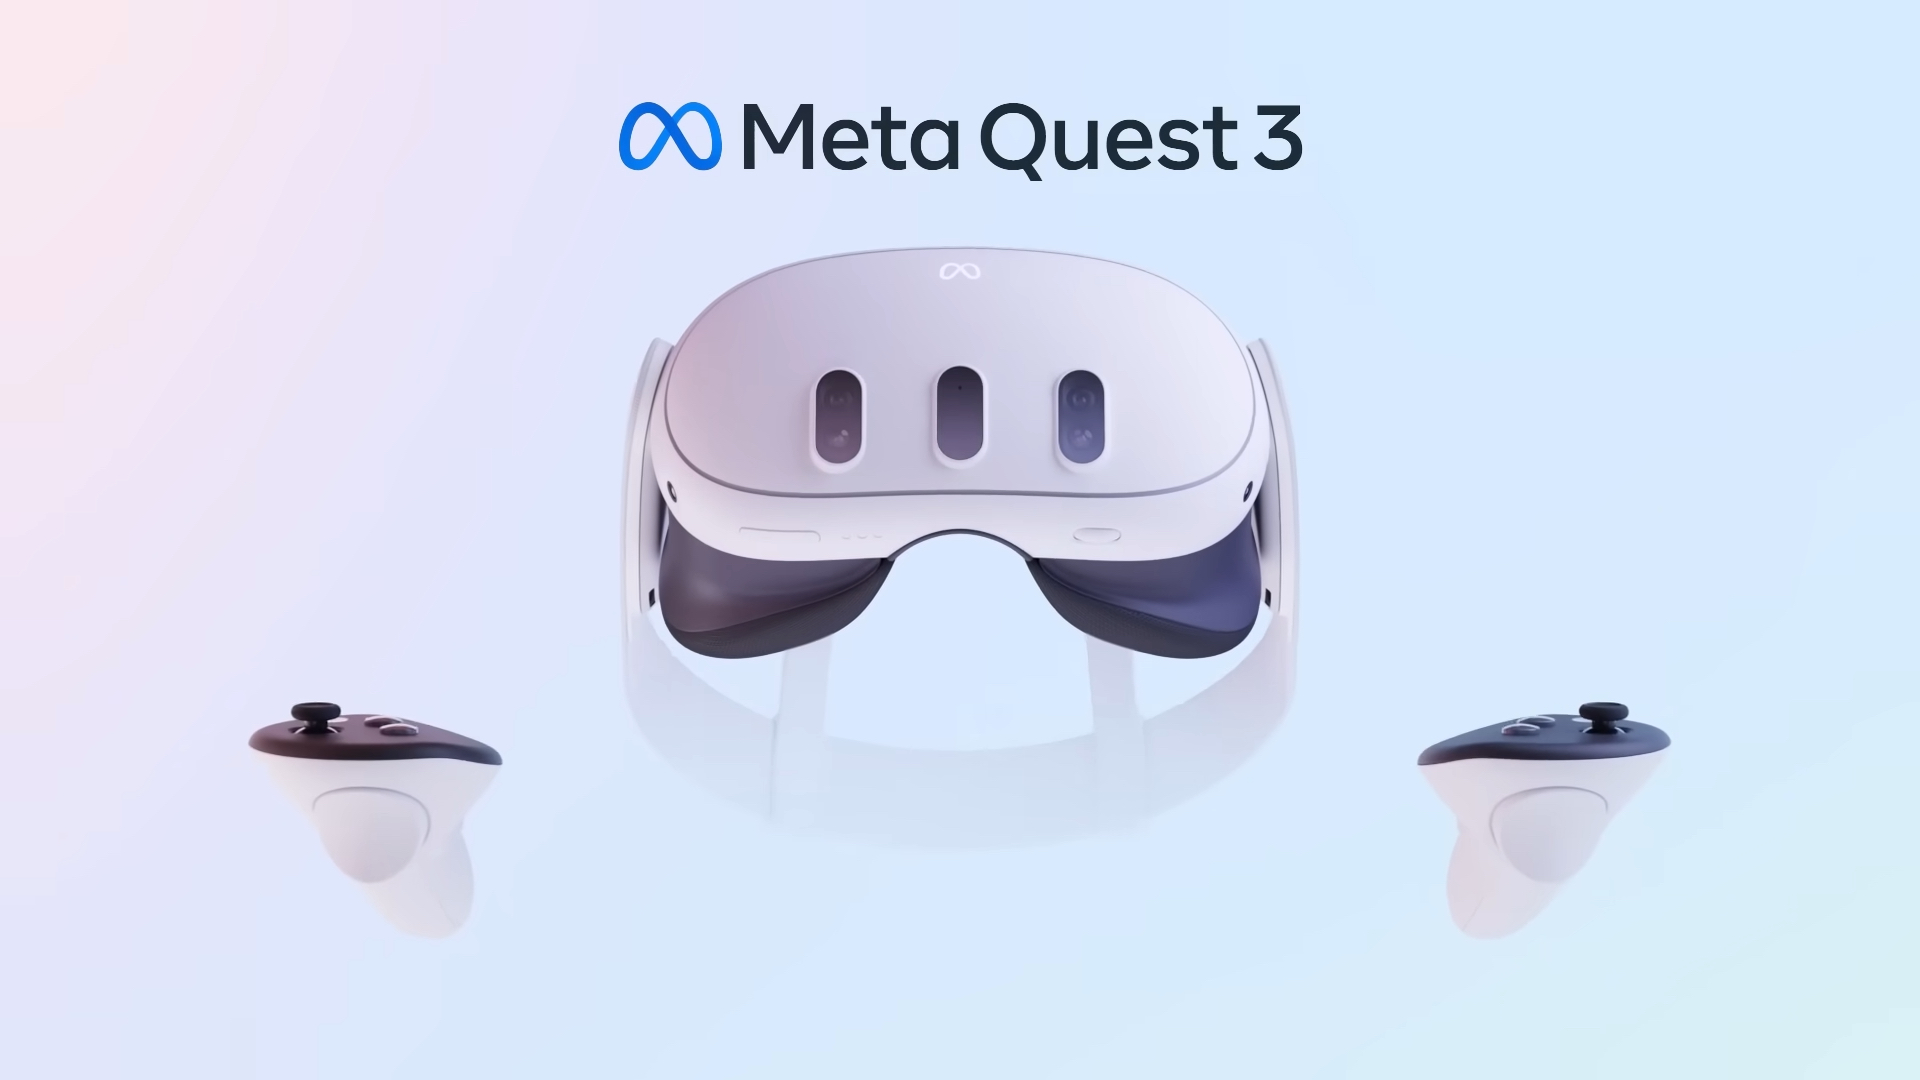 Xbox Cloud Gaming support arrives on Meta Quest headsets